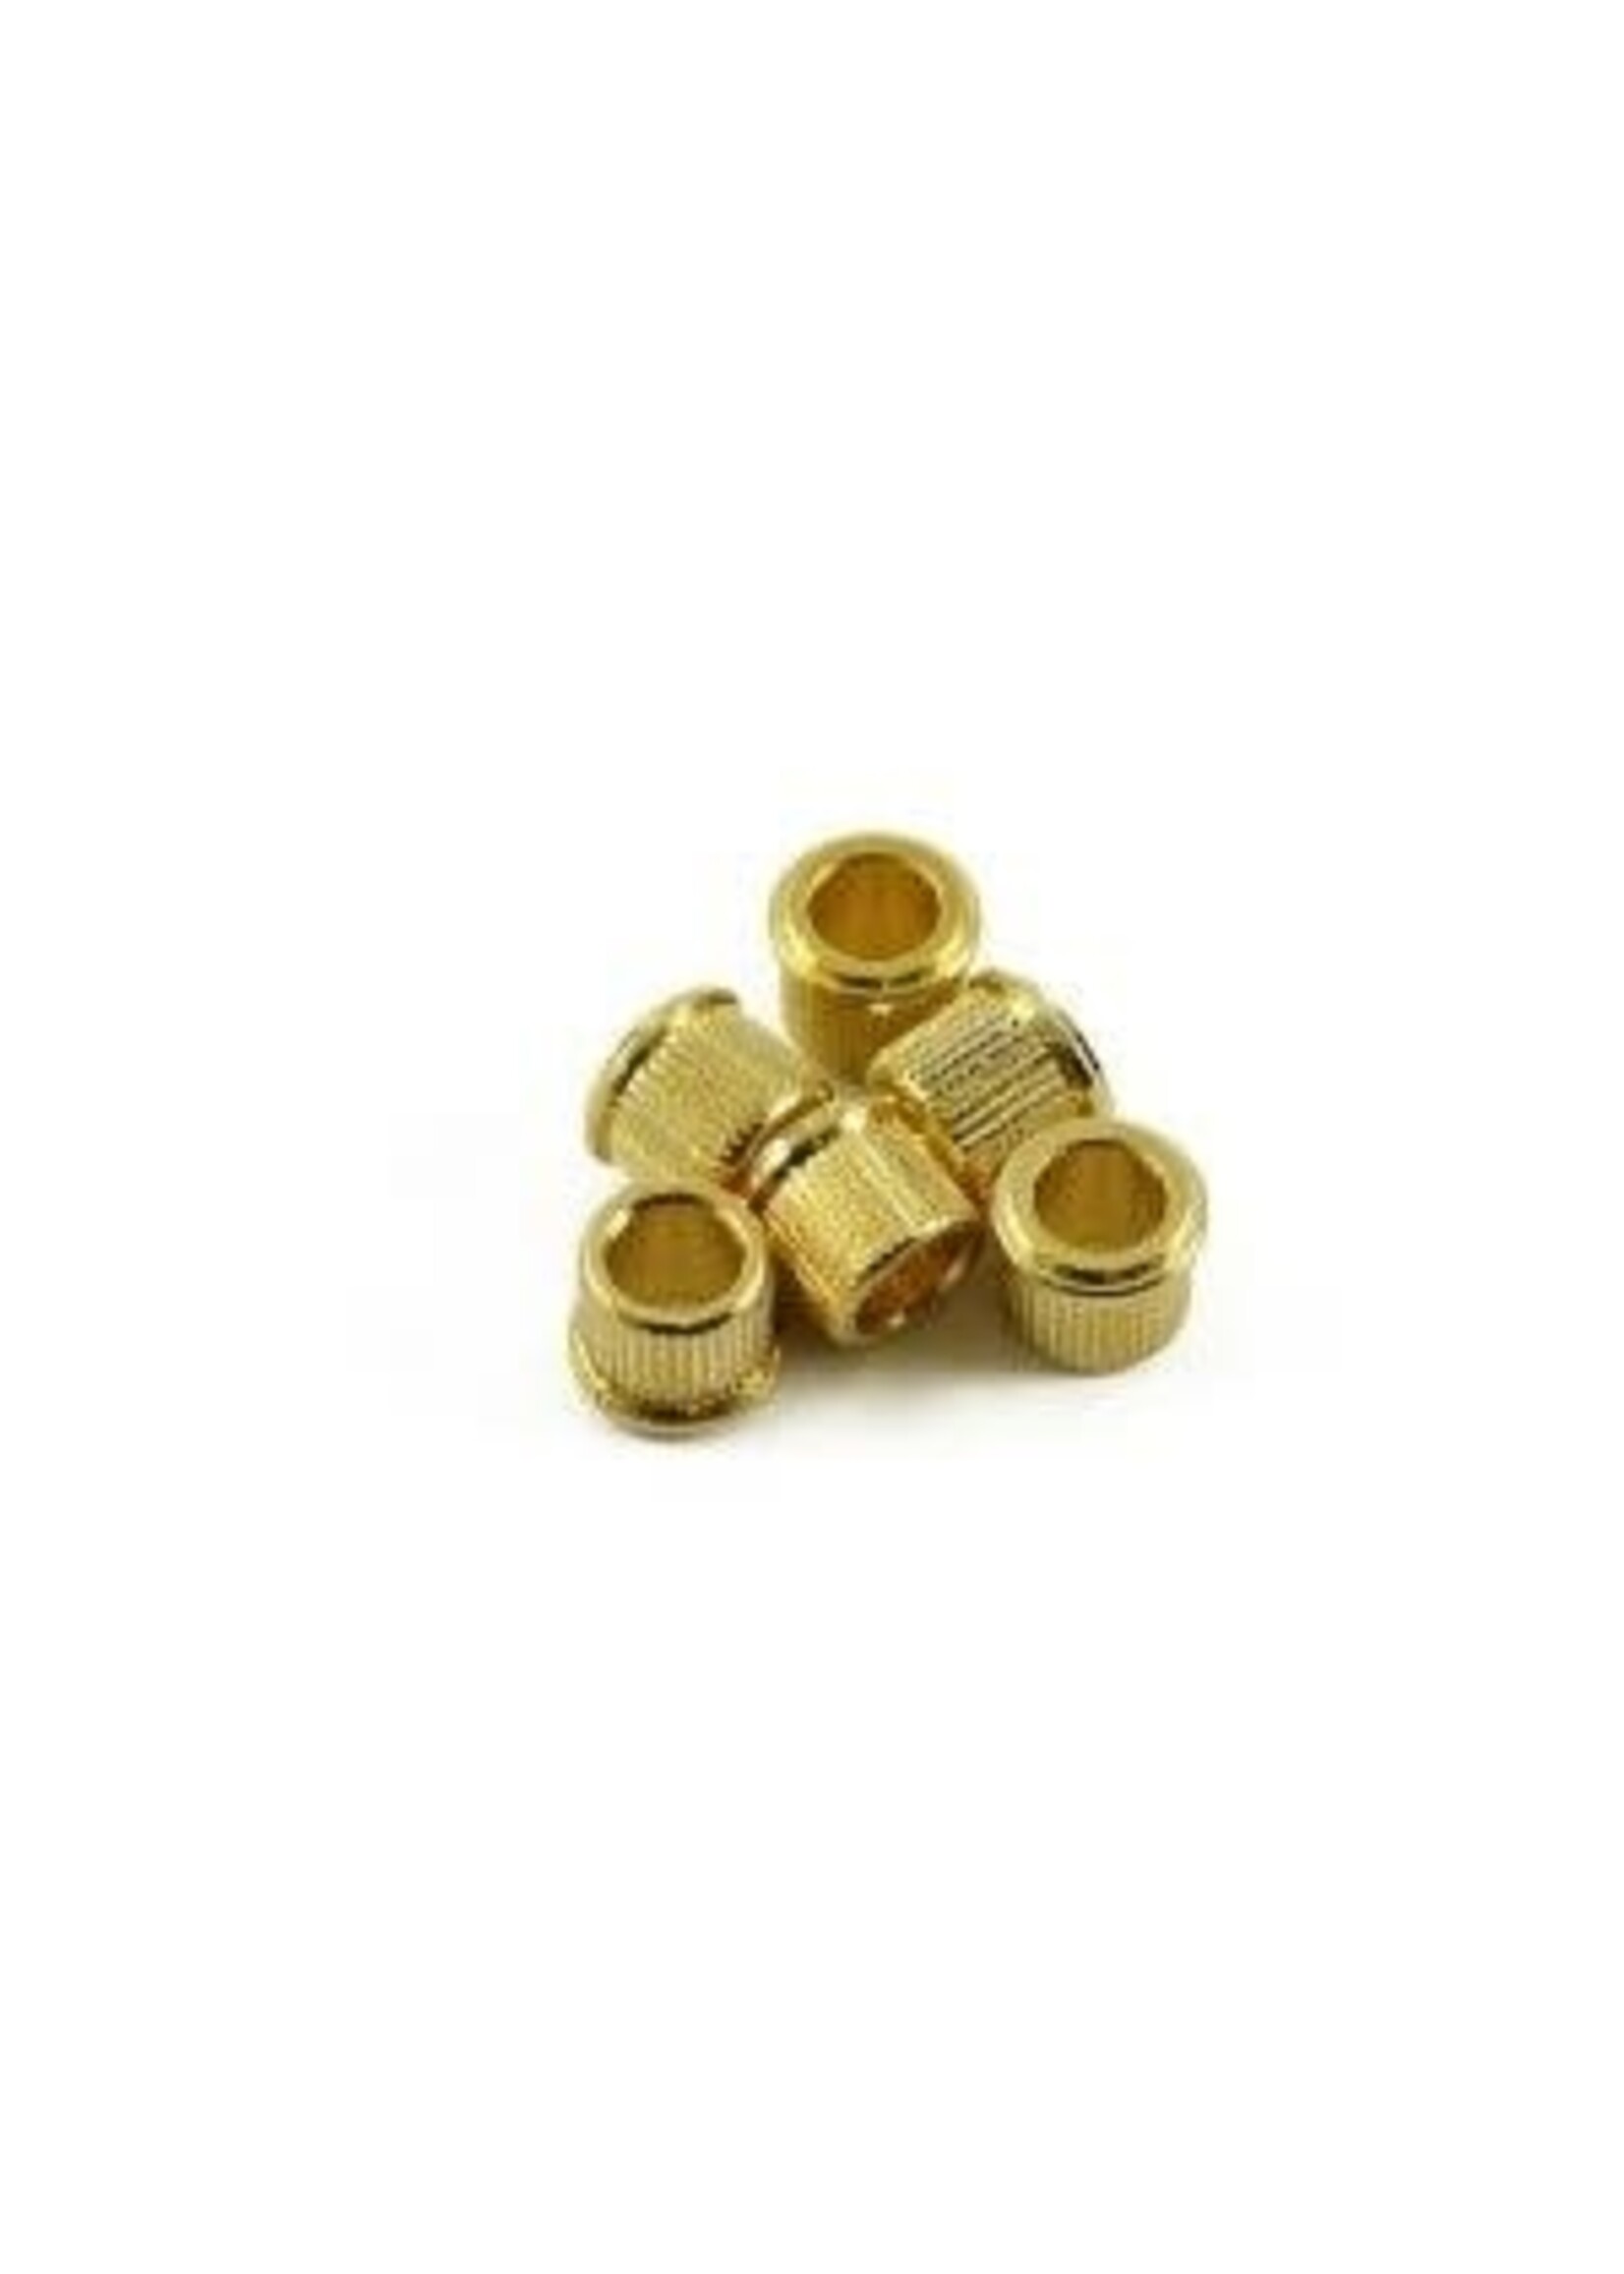 Generic Kluson Adapter Bushings for in-Line Vintage and 3-per-Side Tuning Machines Gold